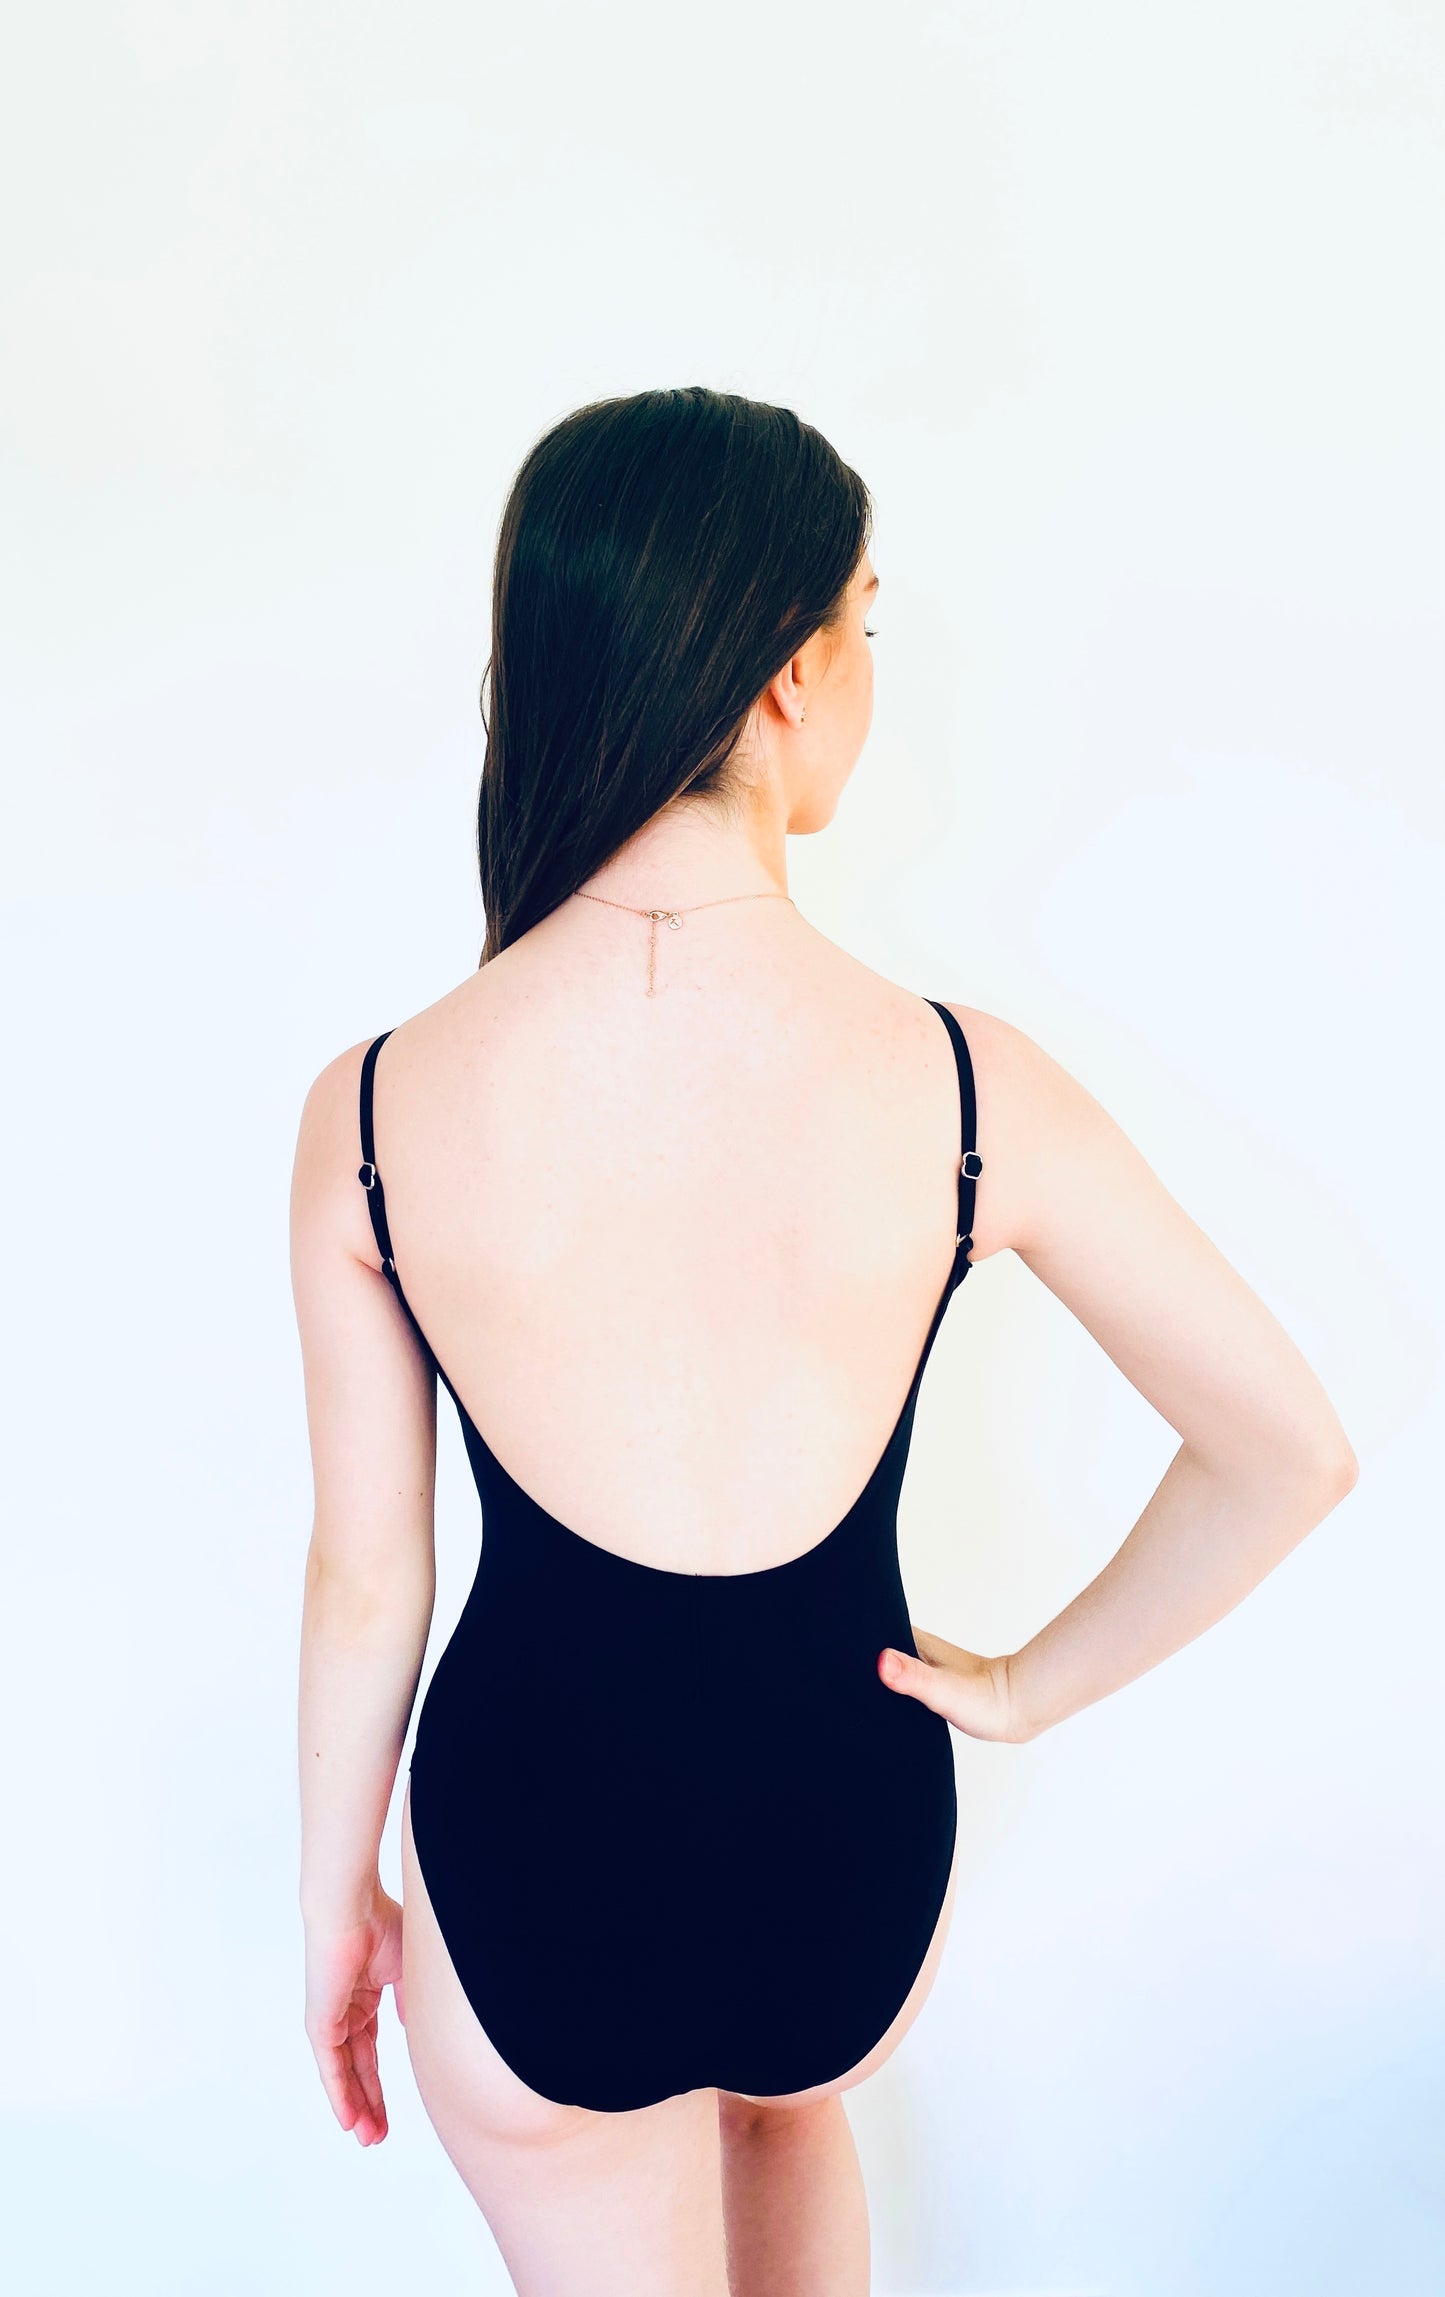 V Mesh Camisole Leotard Black With Black Straps from the Collective Dancewear 